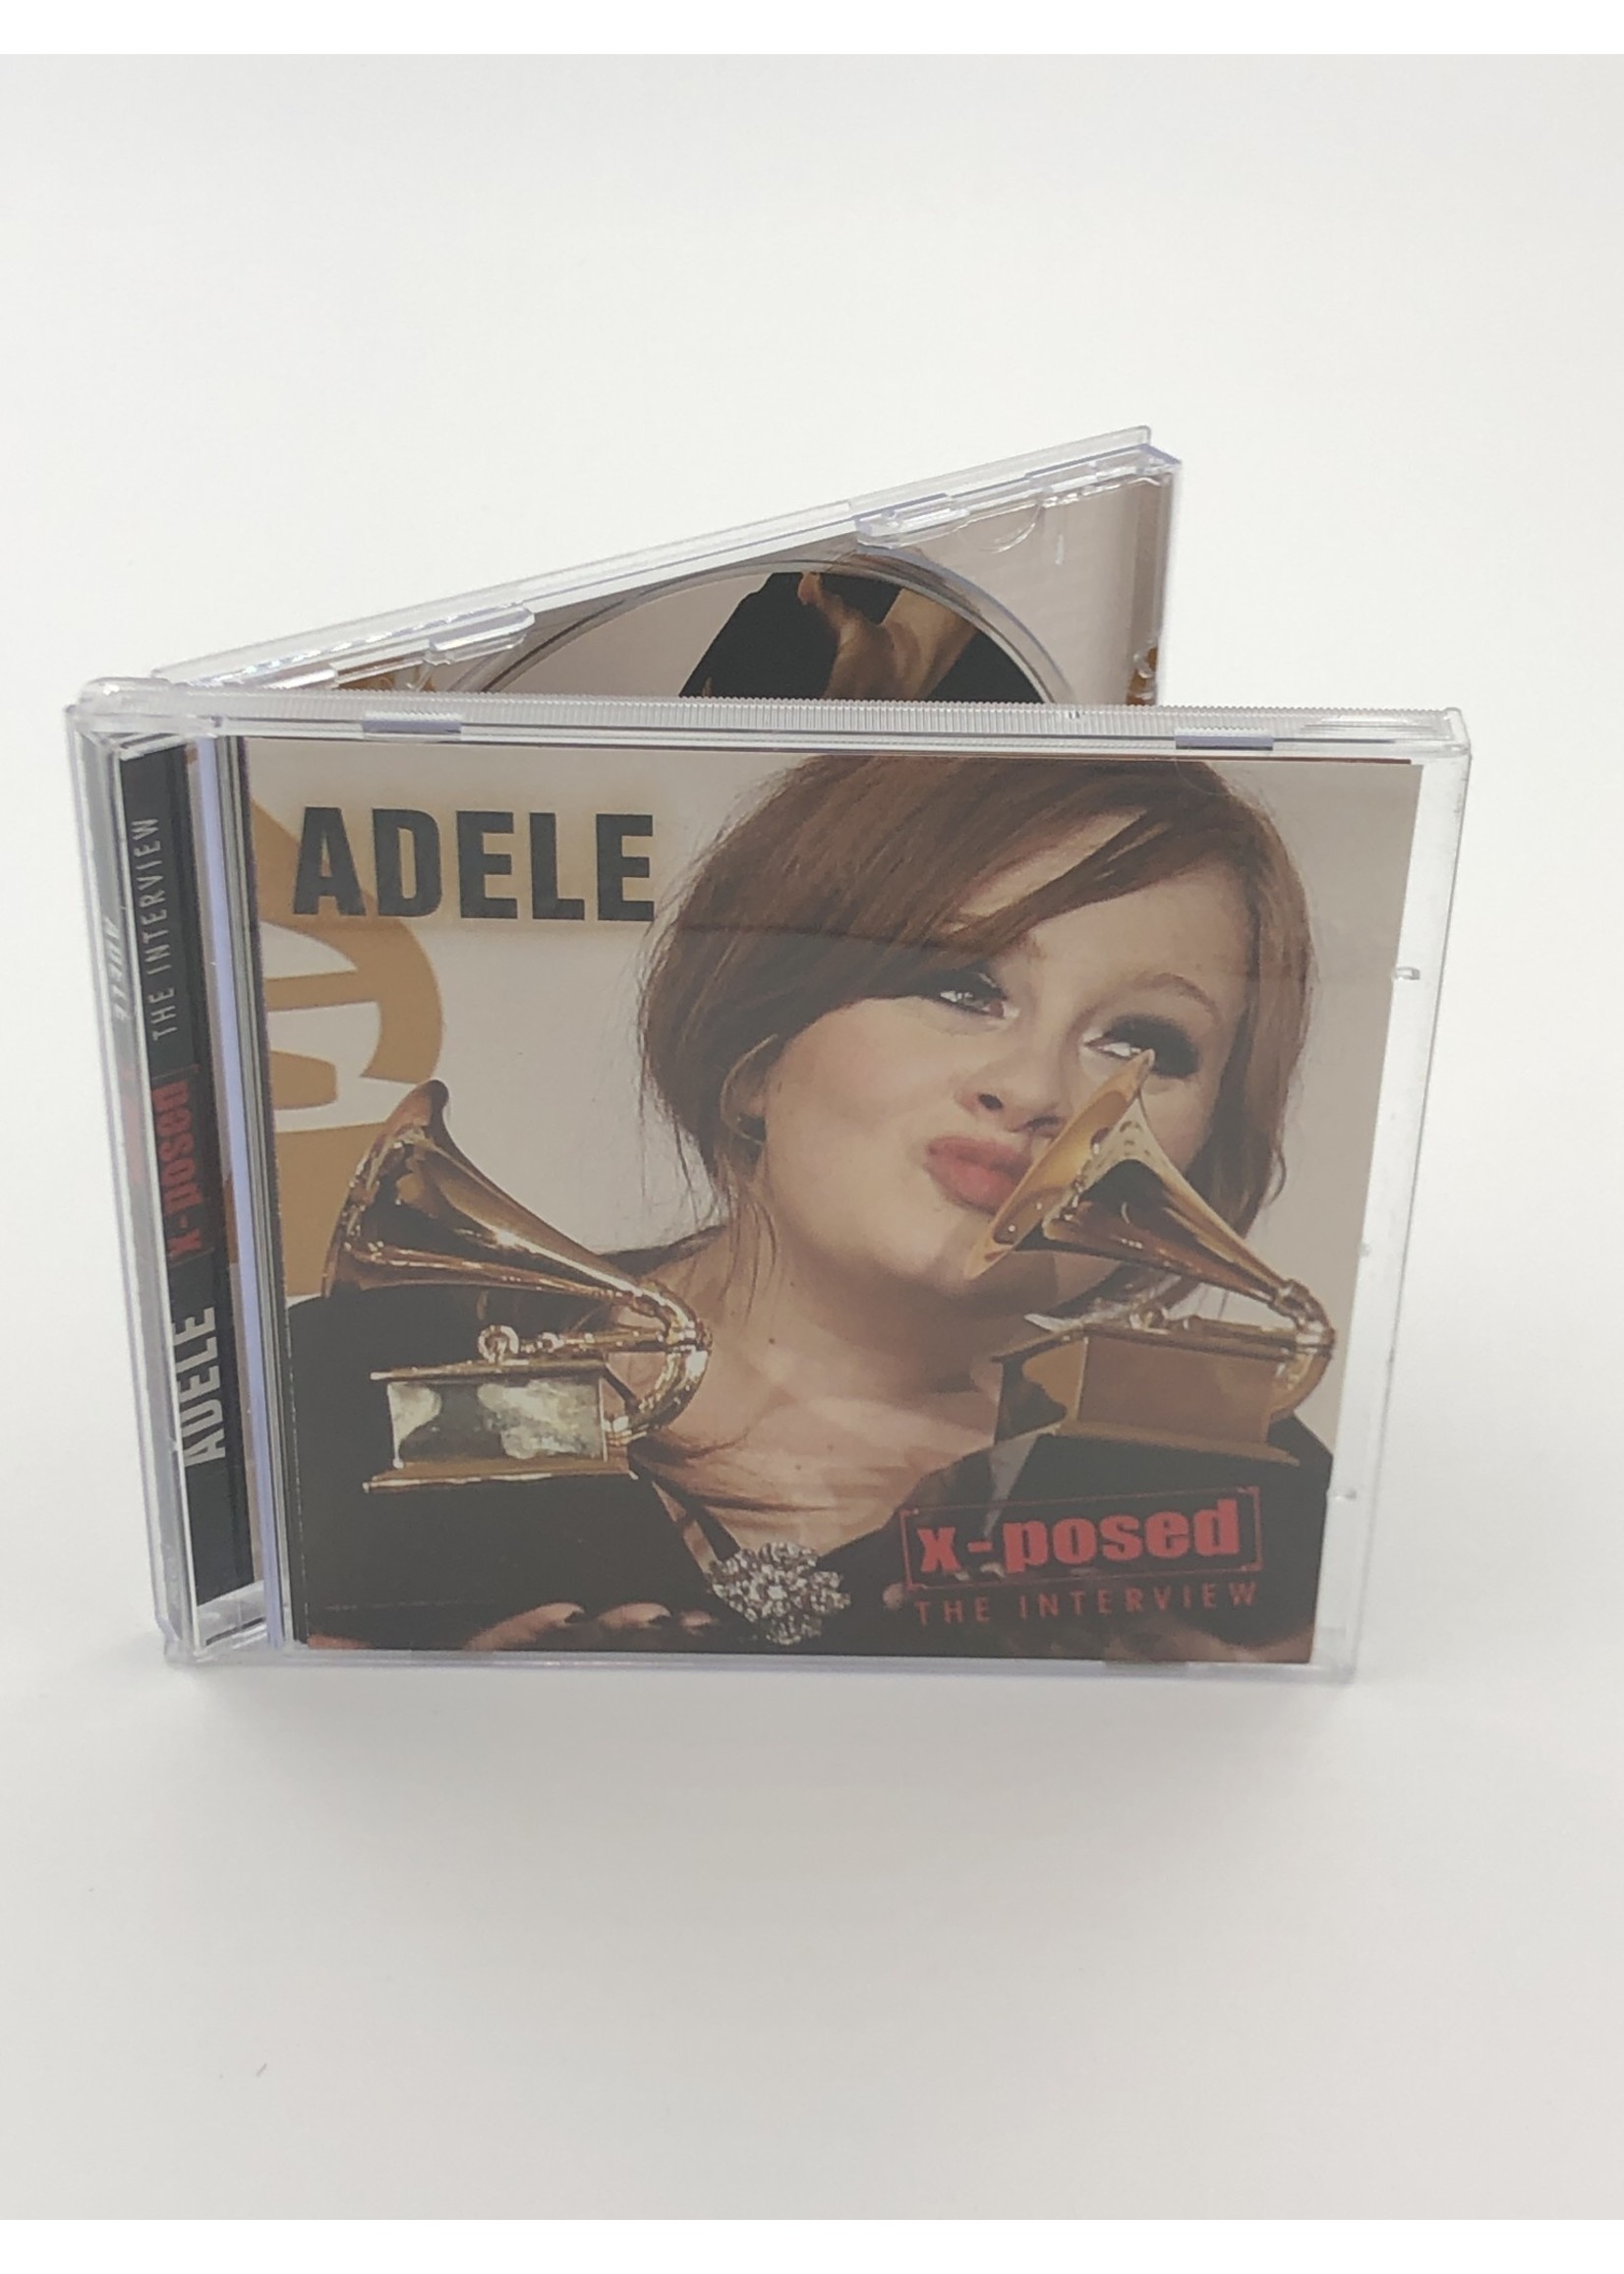 CD Adele: X-posed: The Interview CD